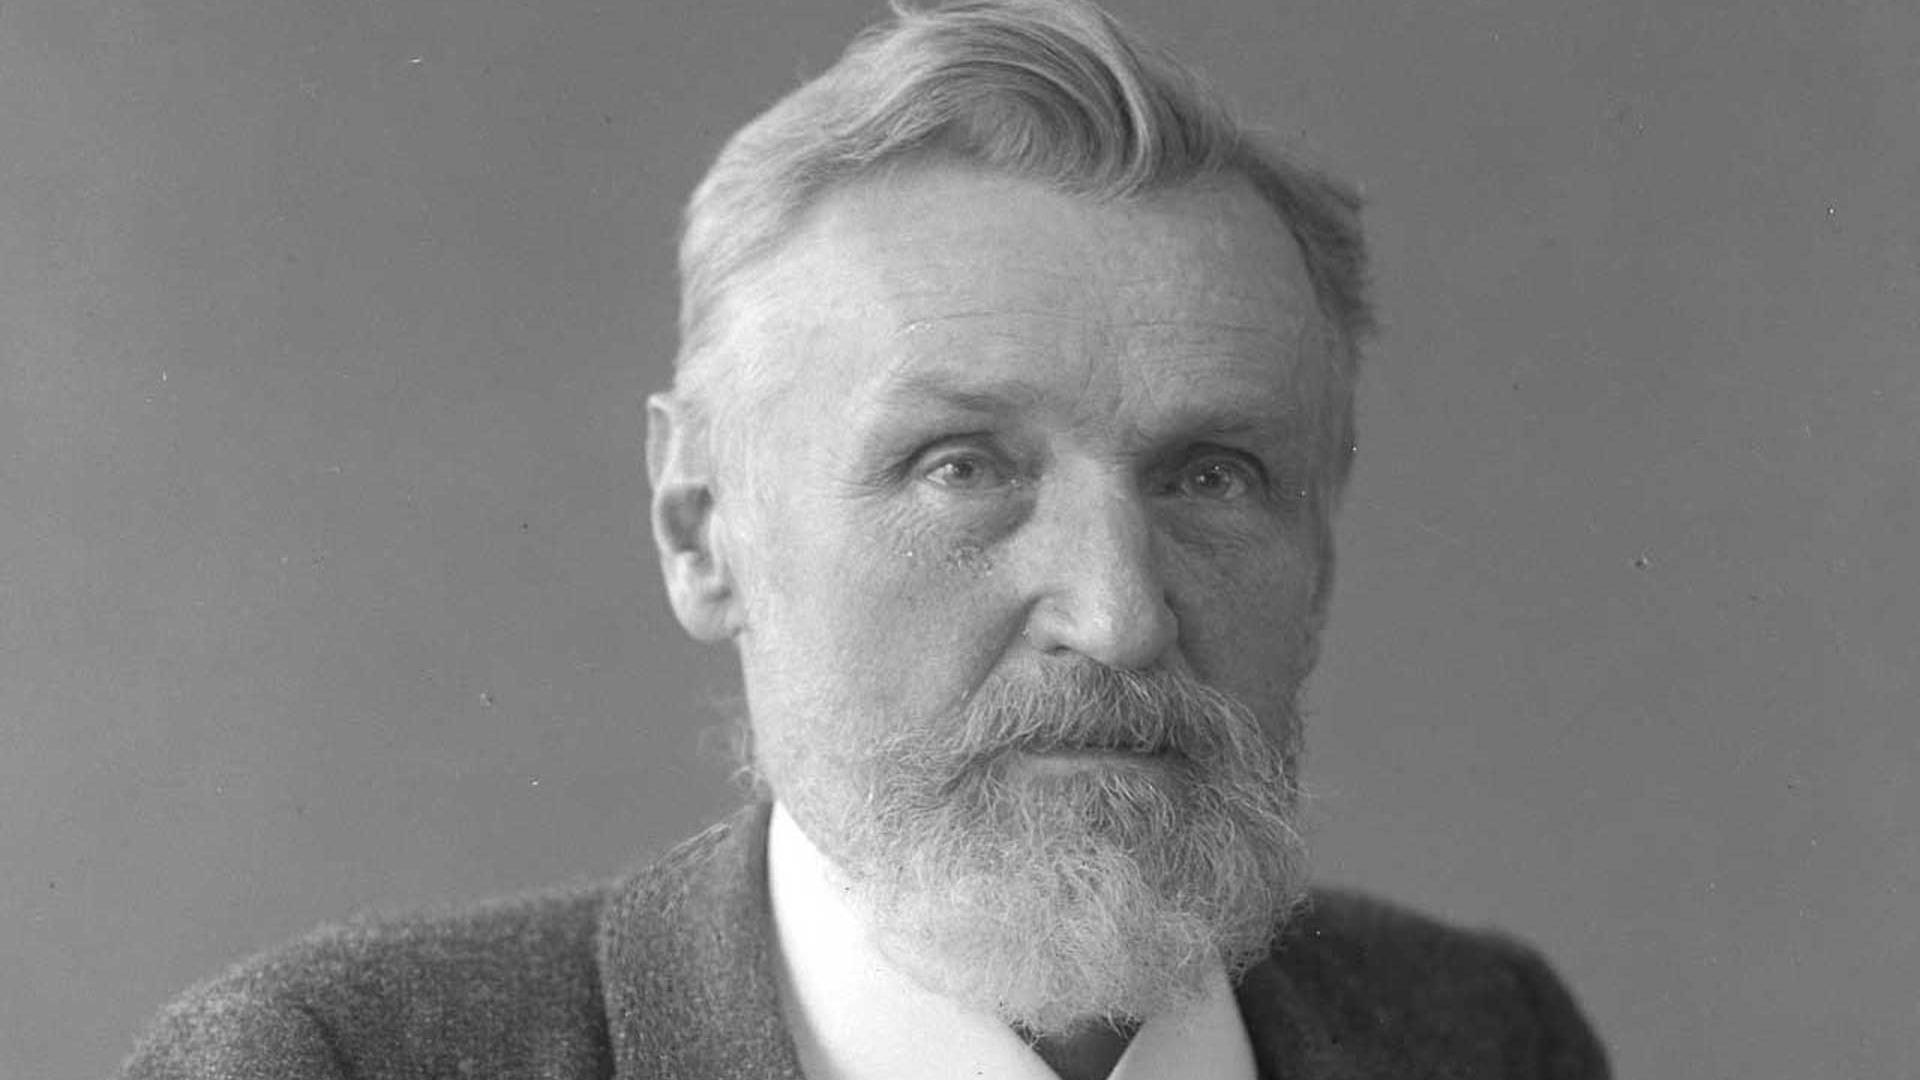 Richard Schüttauf (1861–1926) joined the Camera Lenses department as Scientific Calculator. He later became Head of the Camera Lab and the Quality Assurance department for Camera Lenses.